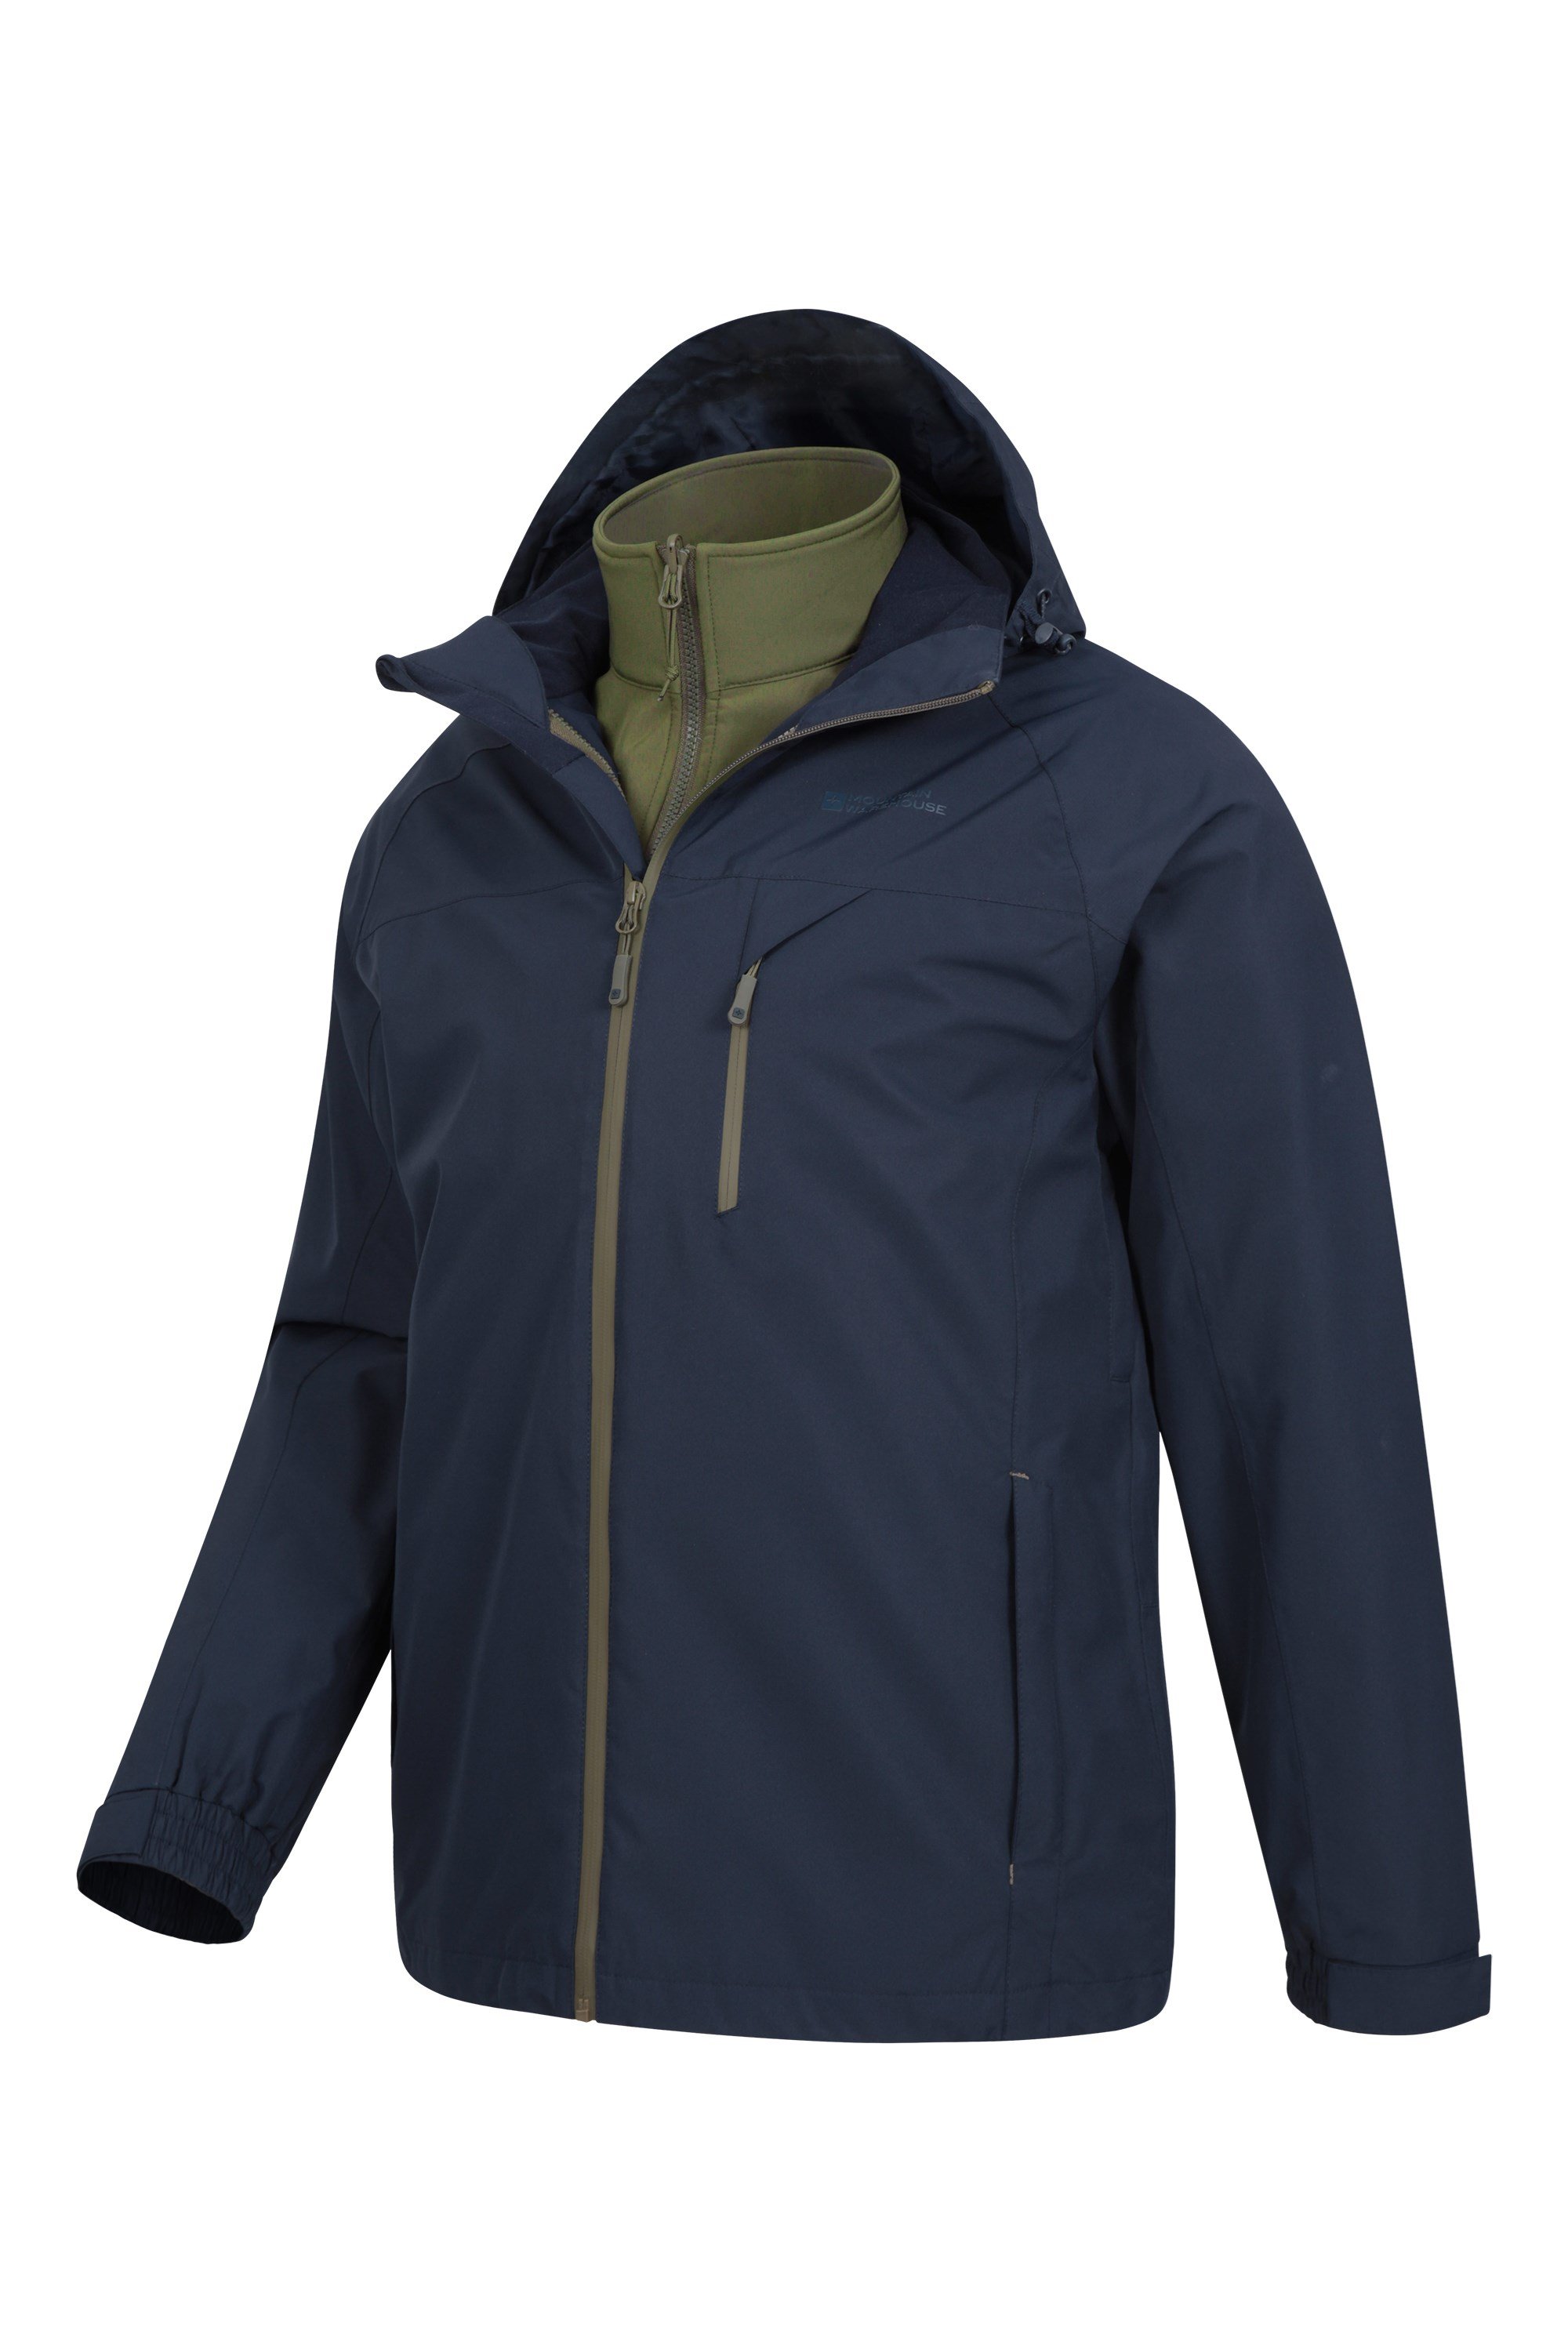 Brisk Extreme Mens 3-in-1 Waterproof Jacket | Mountain Warehouse GB